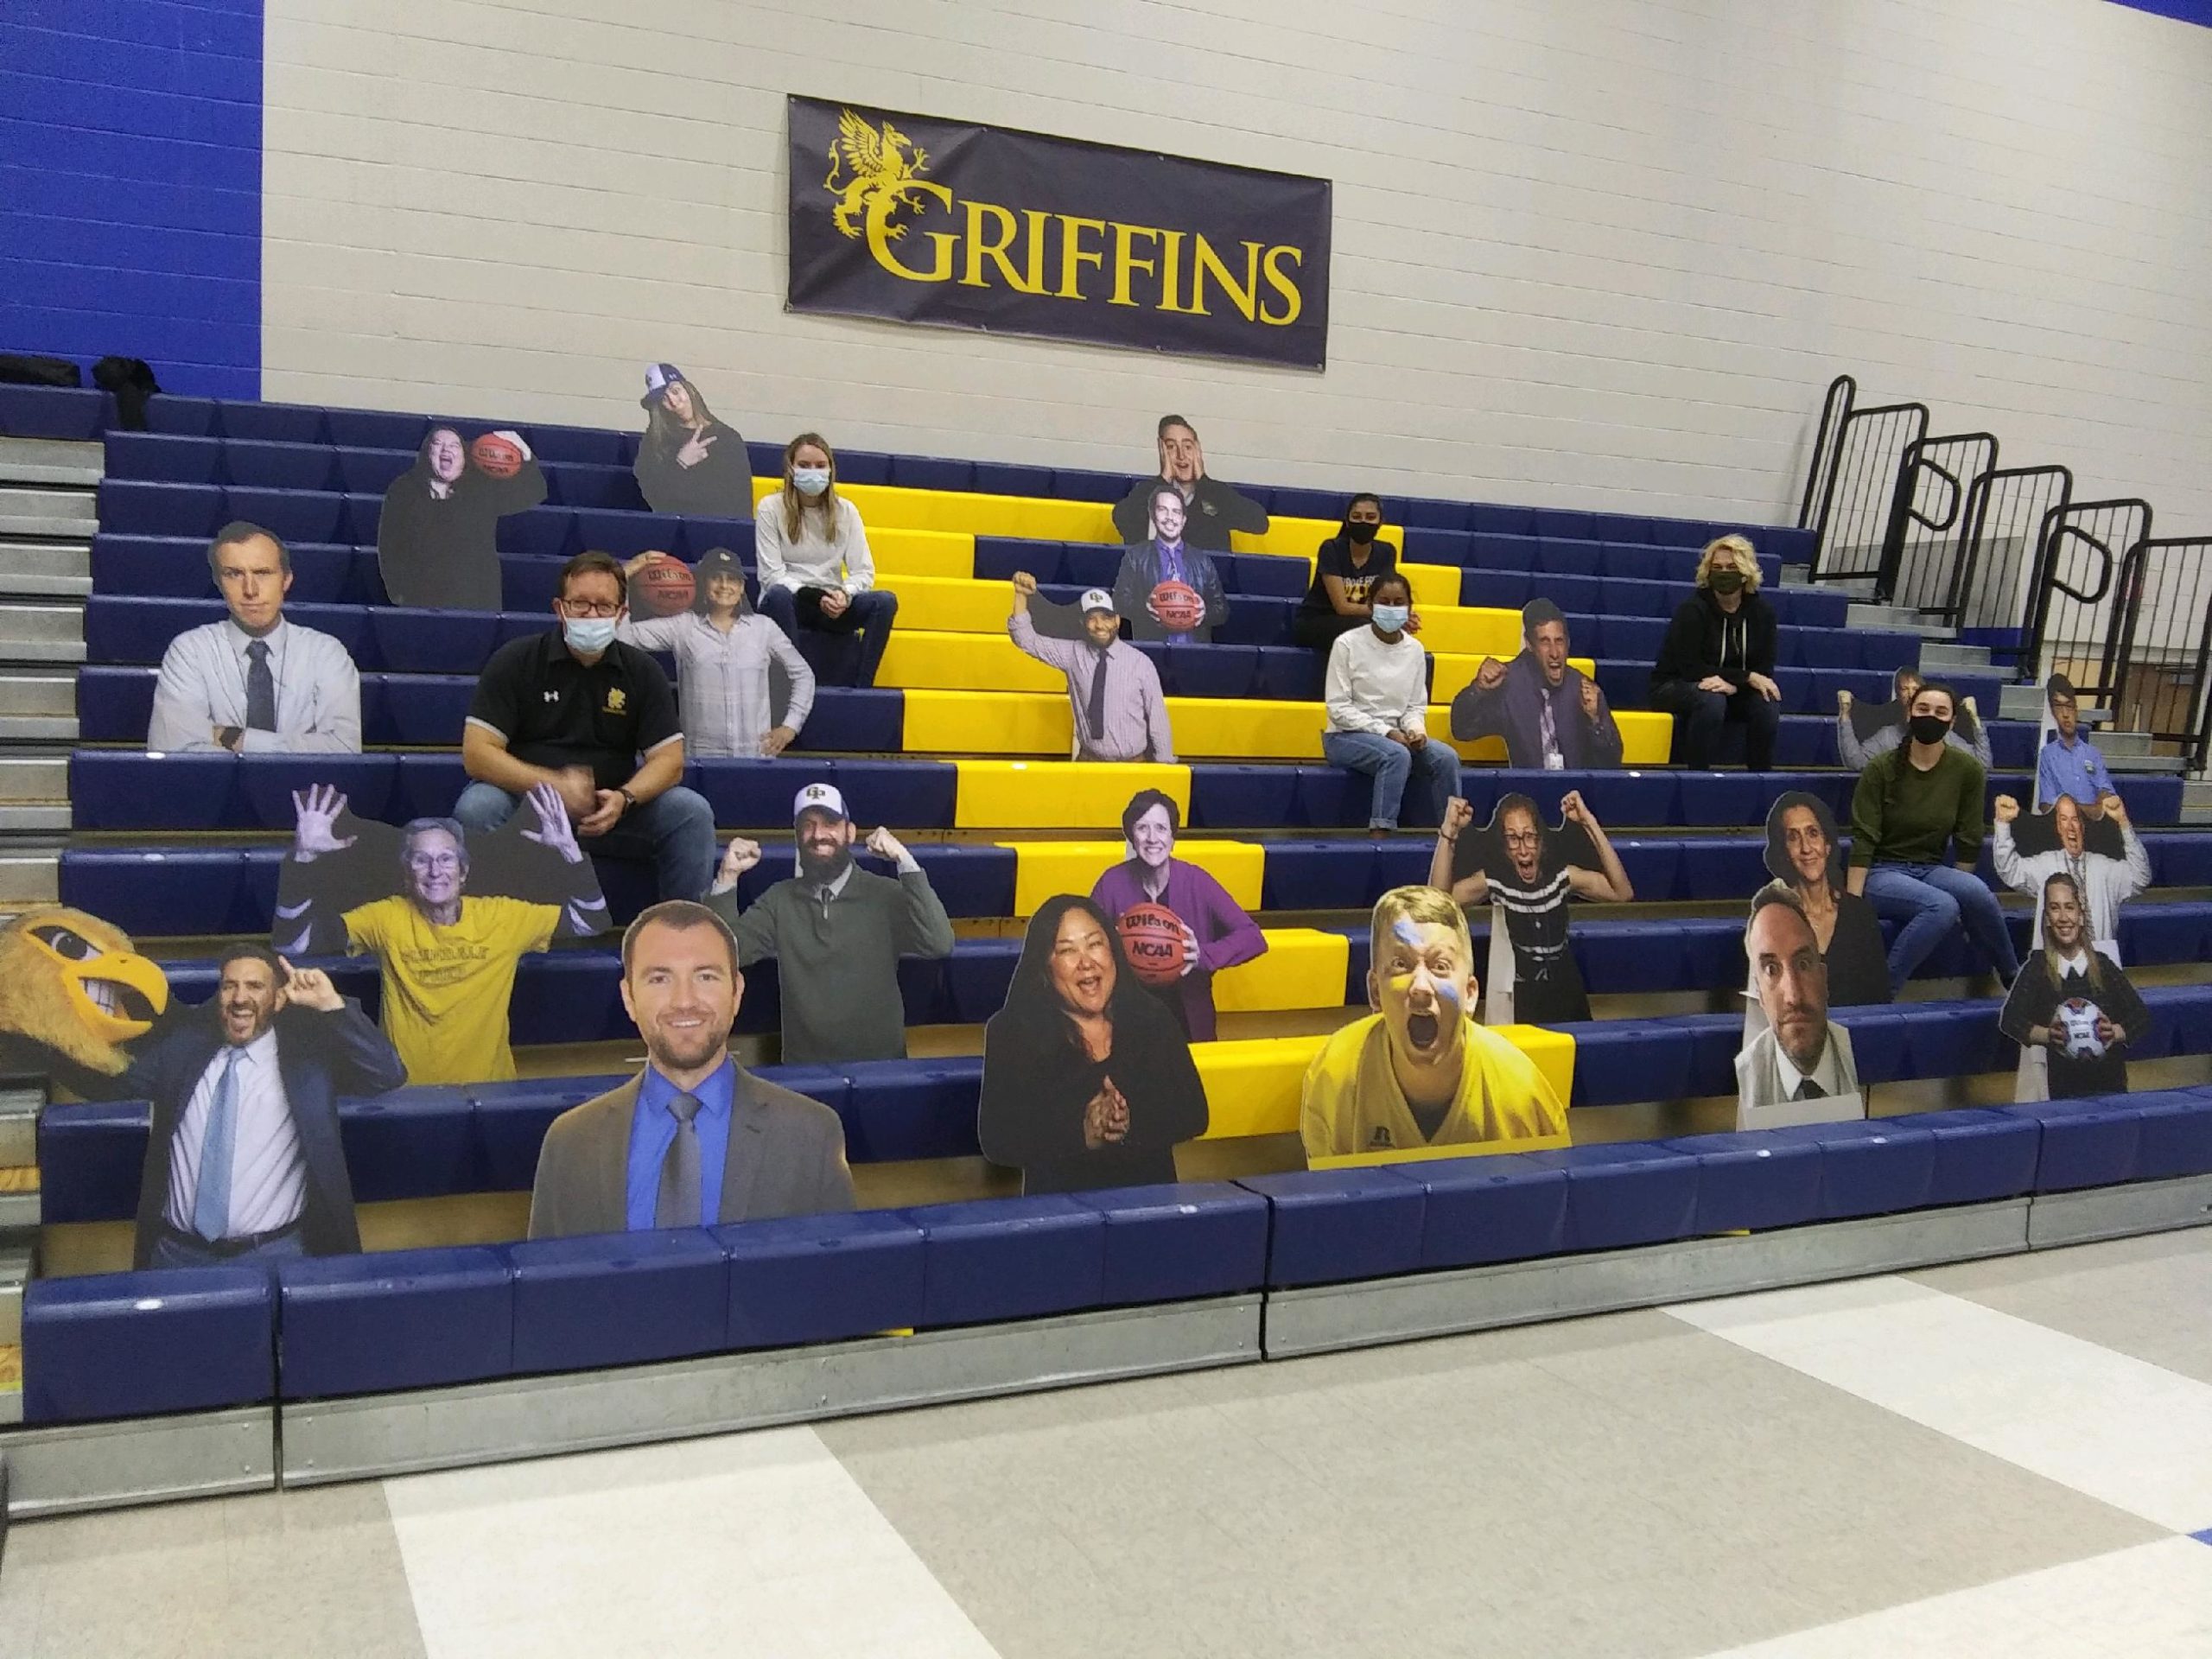 bleachers with socially distanced spectators that have cardboard cutouts of real people in between them